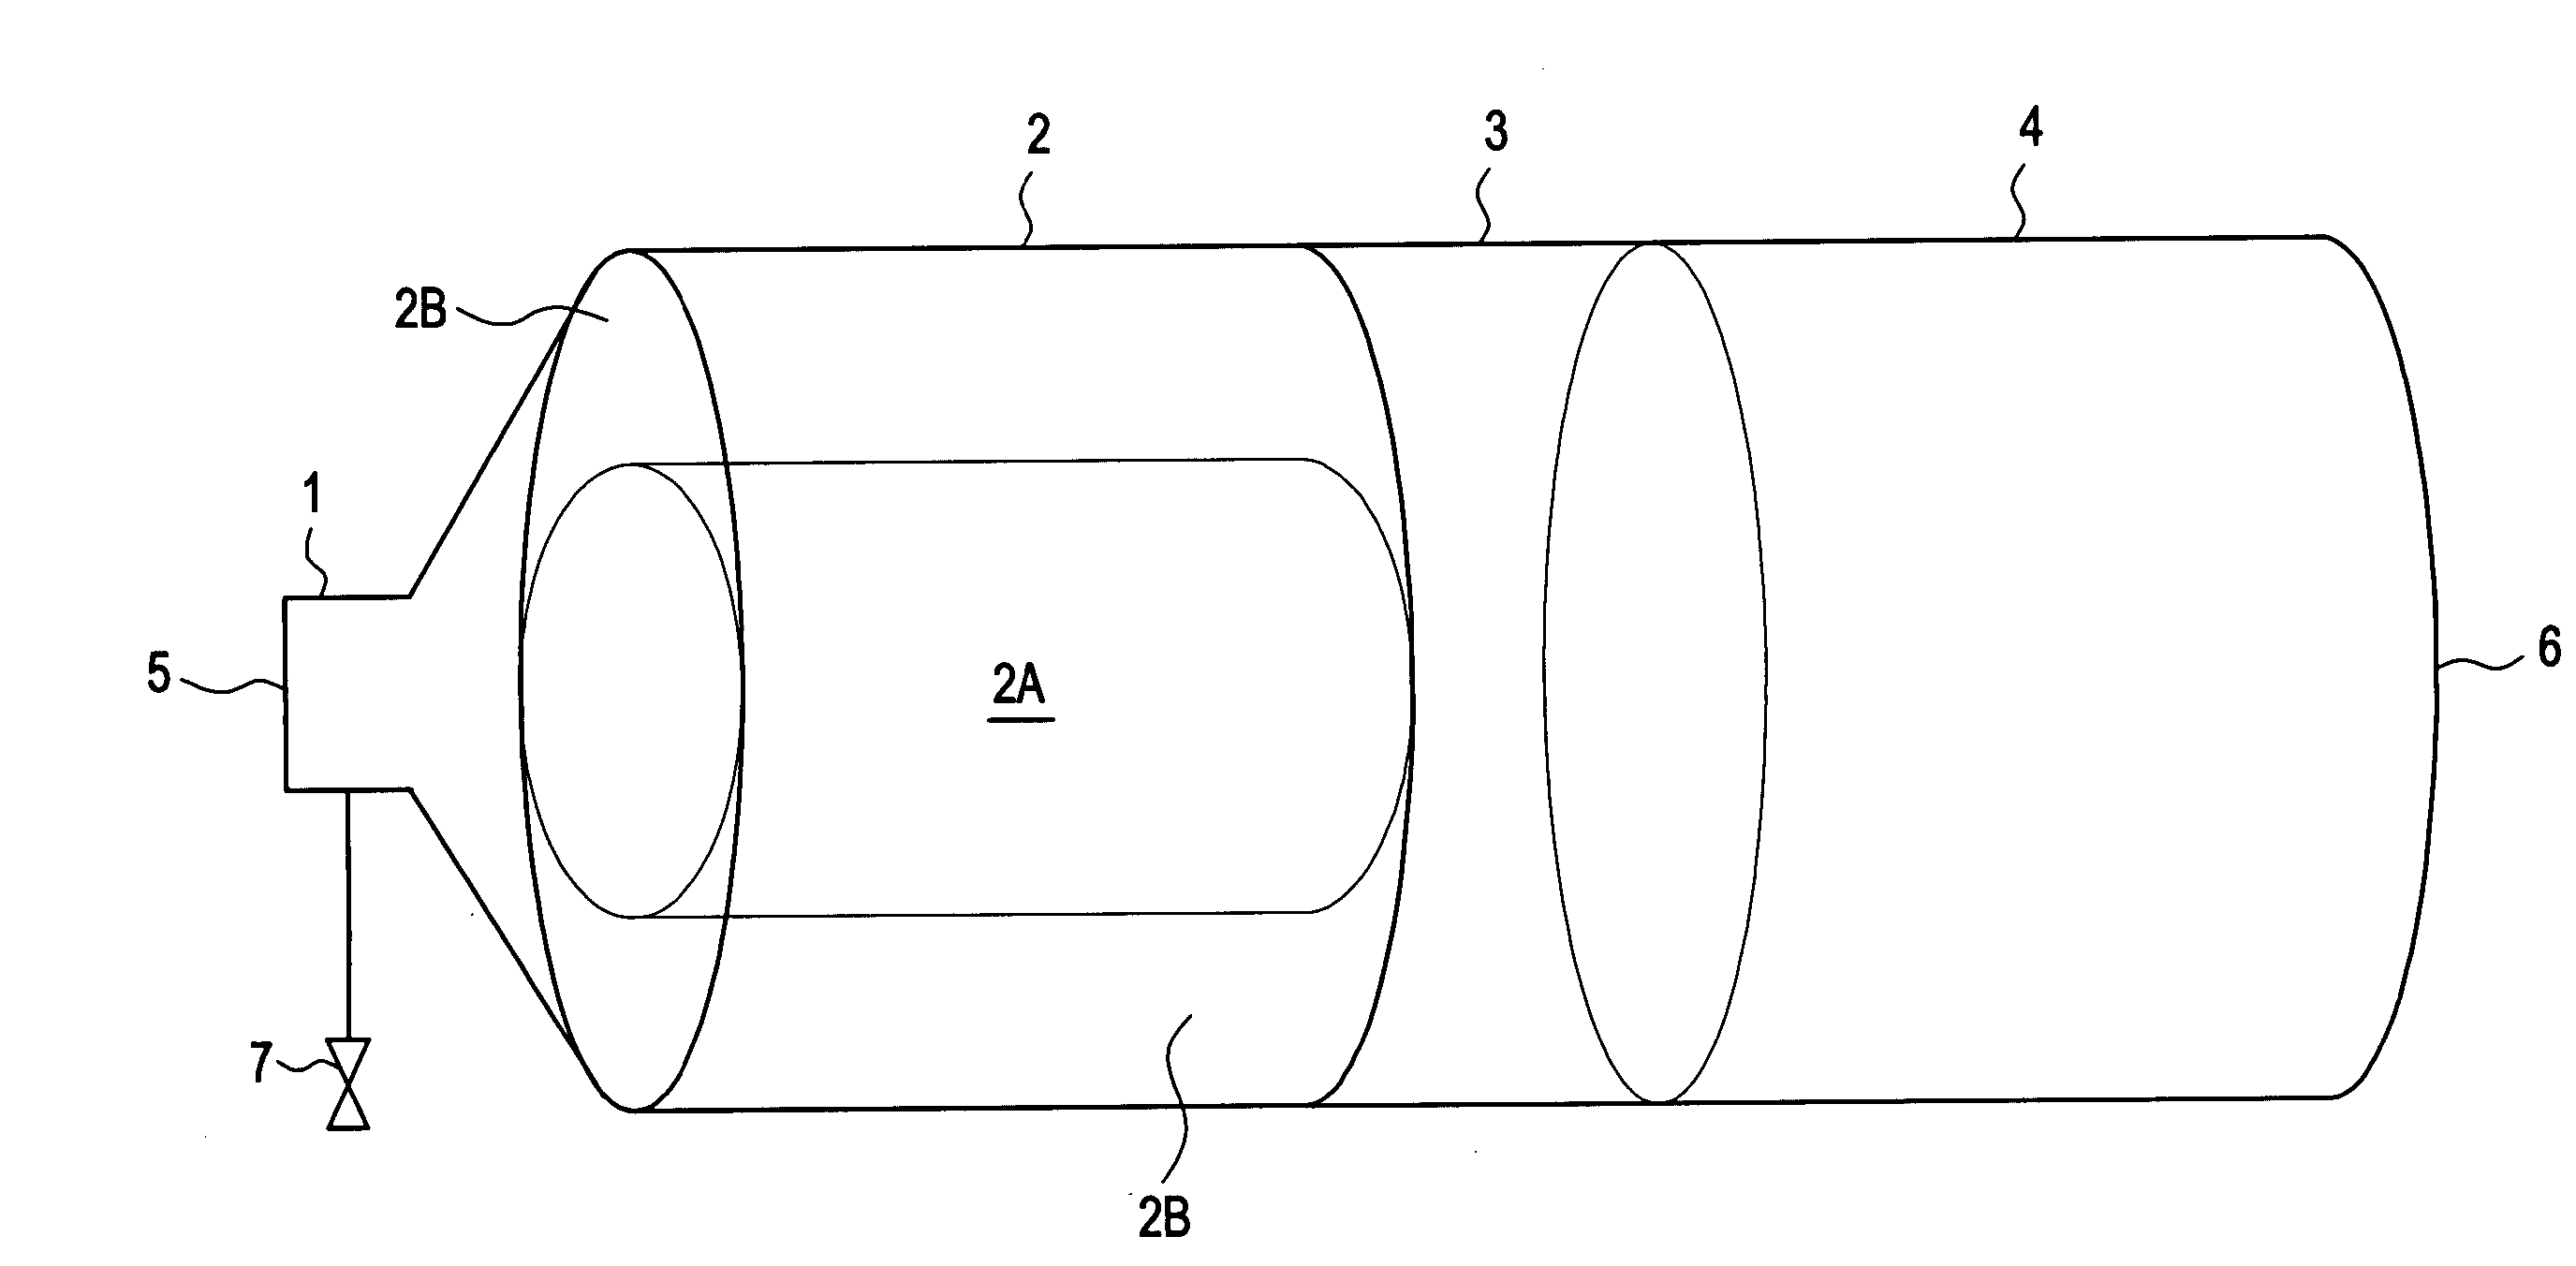 Use of a radial zone coating to facilitate a two-stage prox system with single air injection